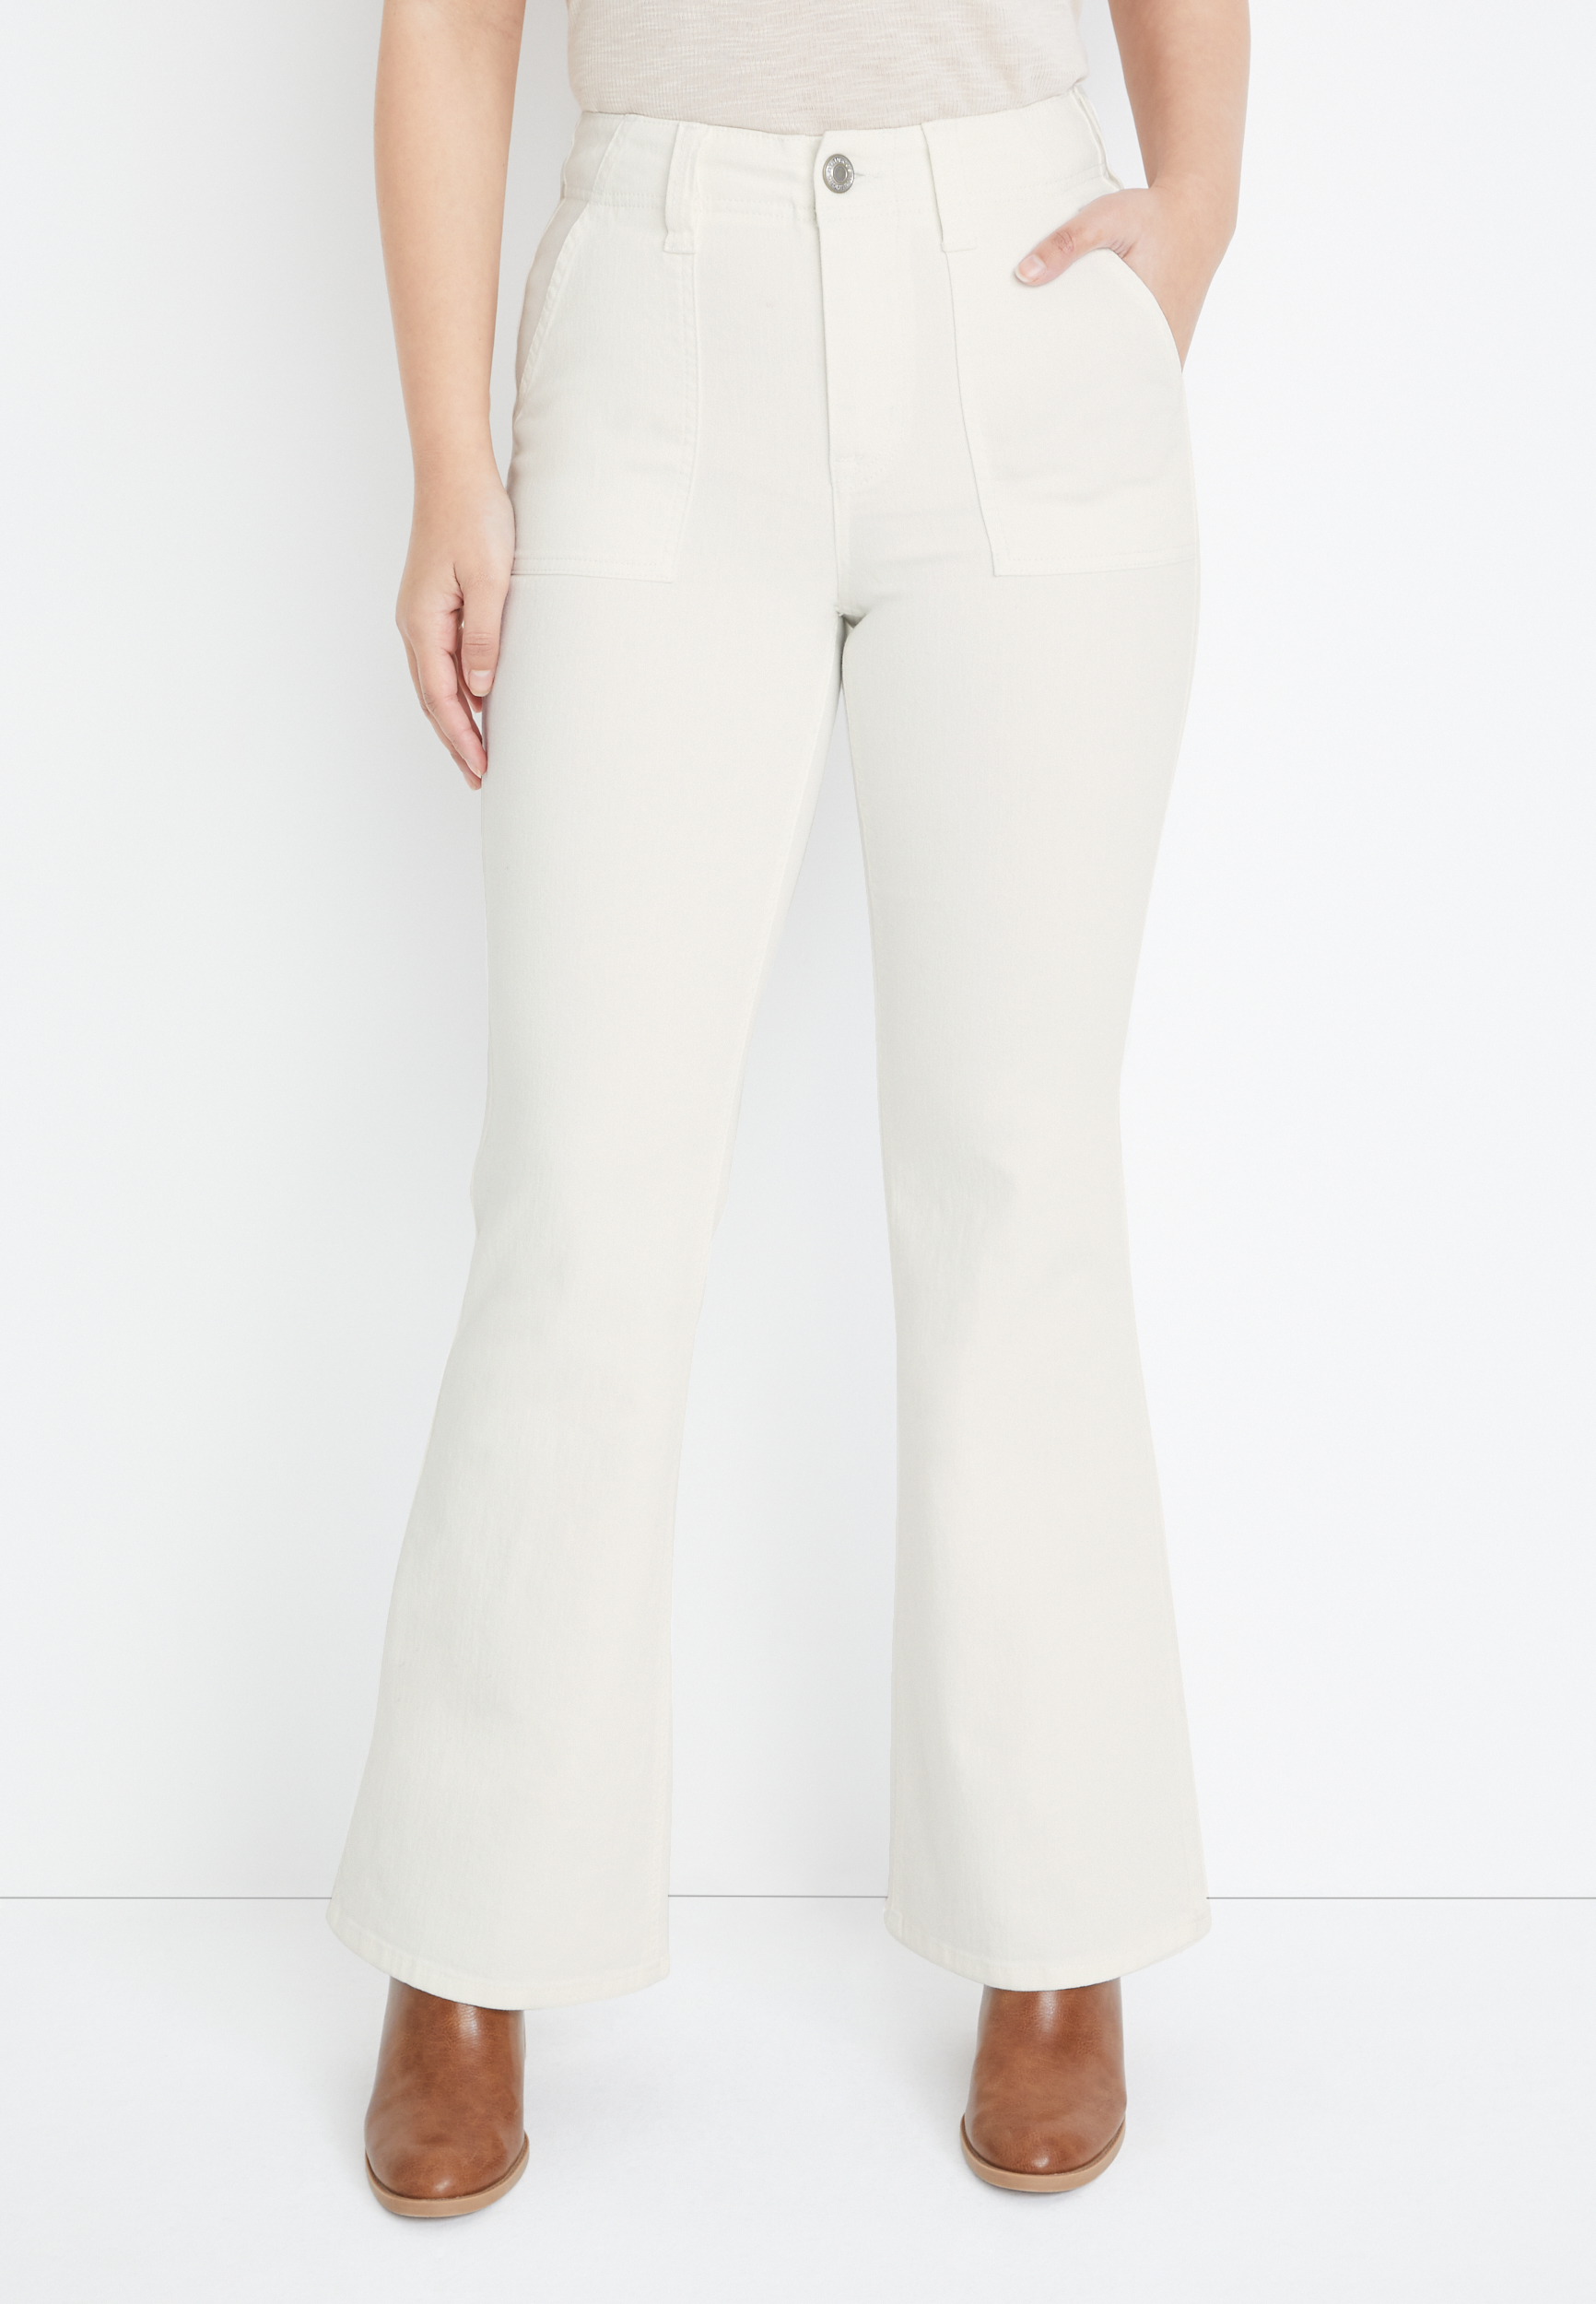 Maurices white jeans